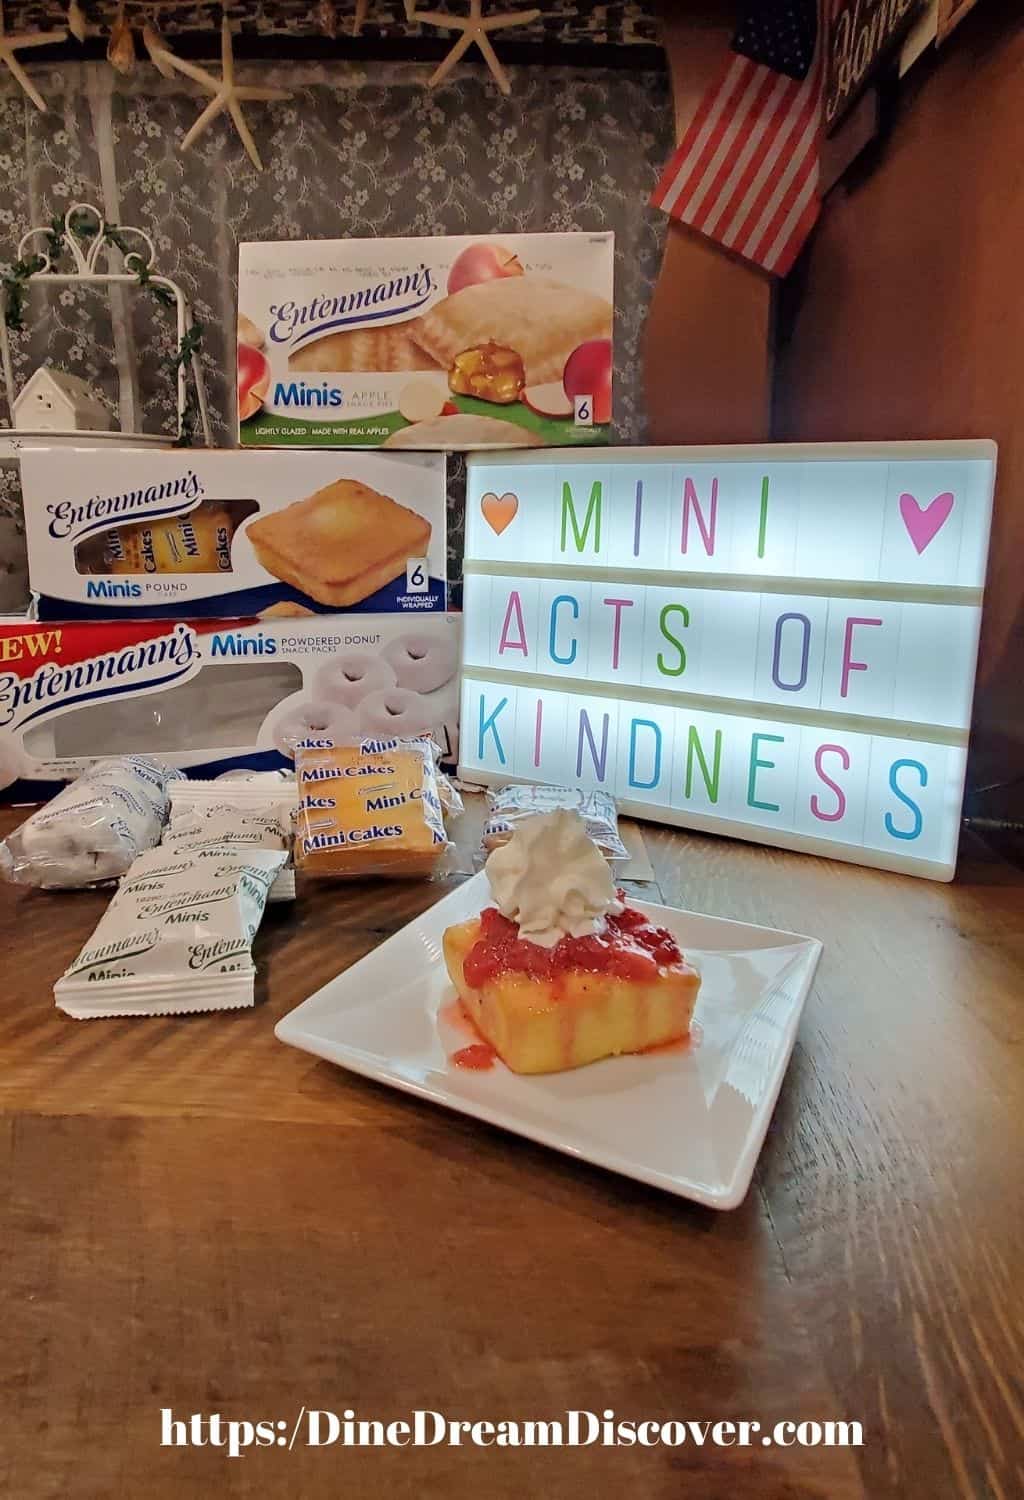 Entenmanns Mini Acts of Kindness 5K Giveaway